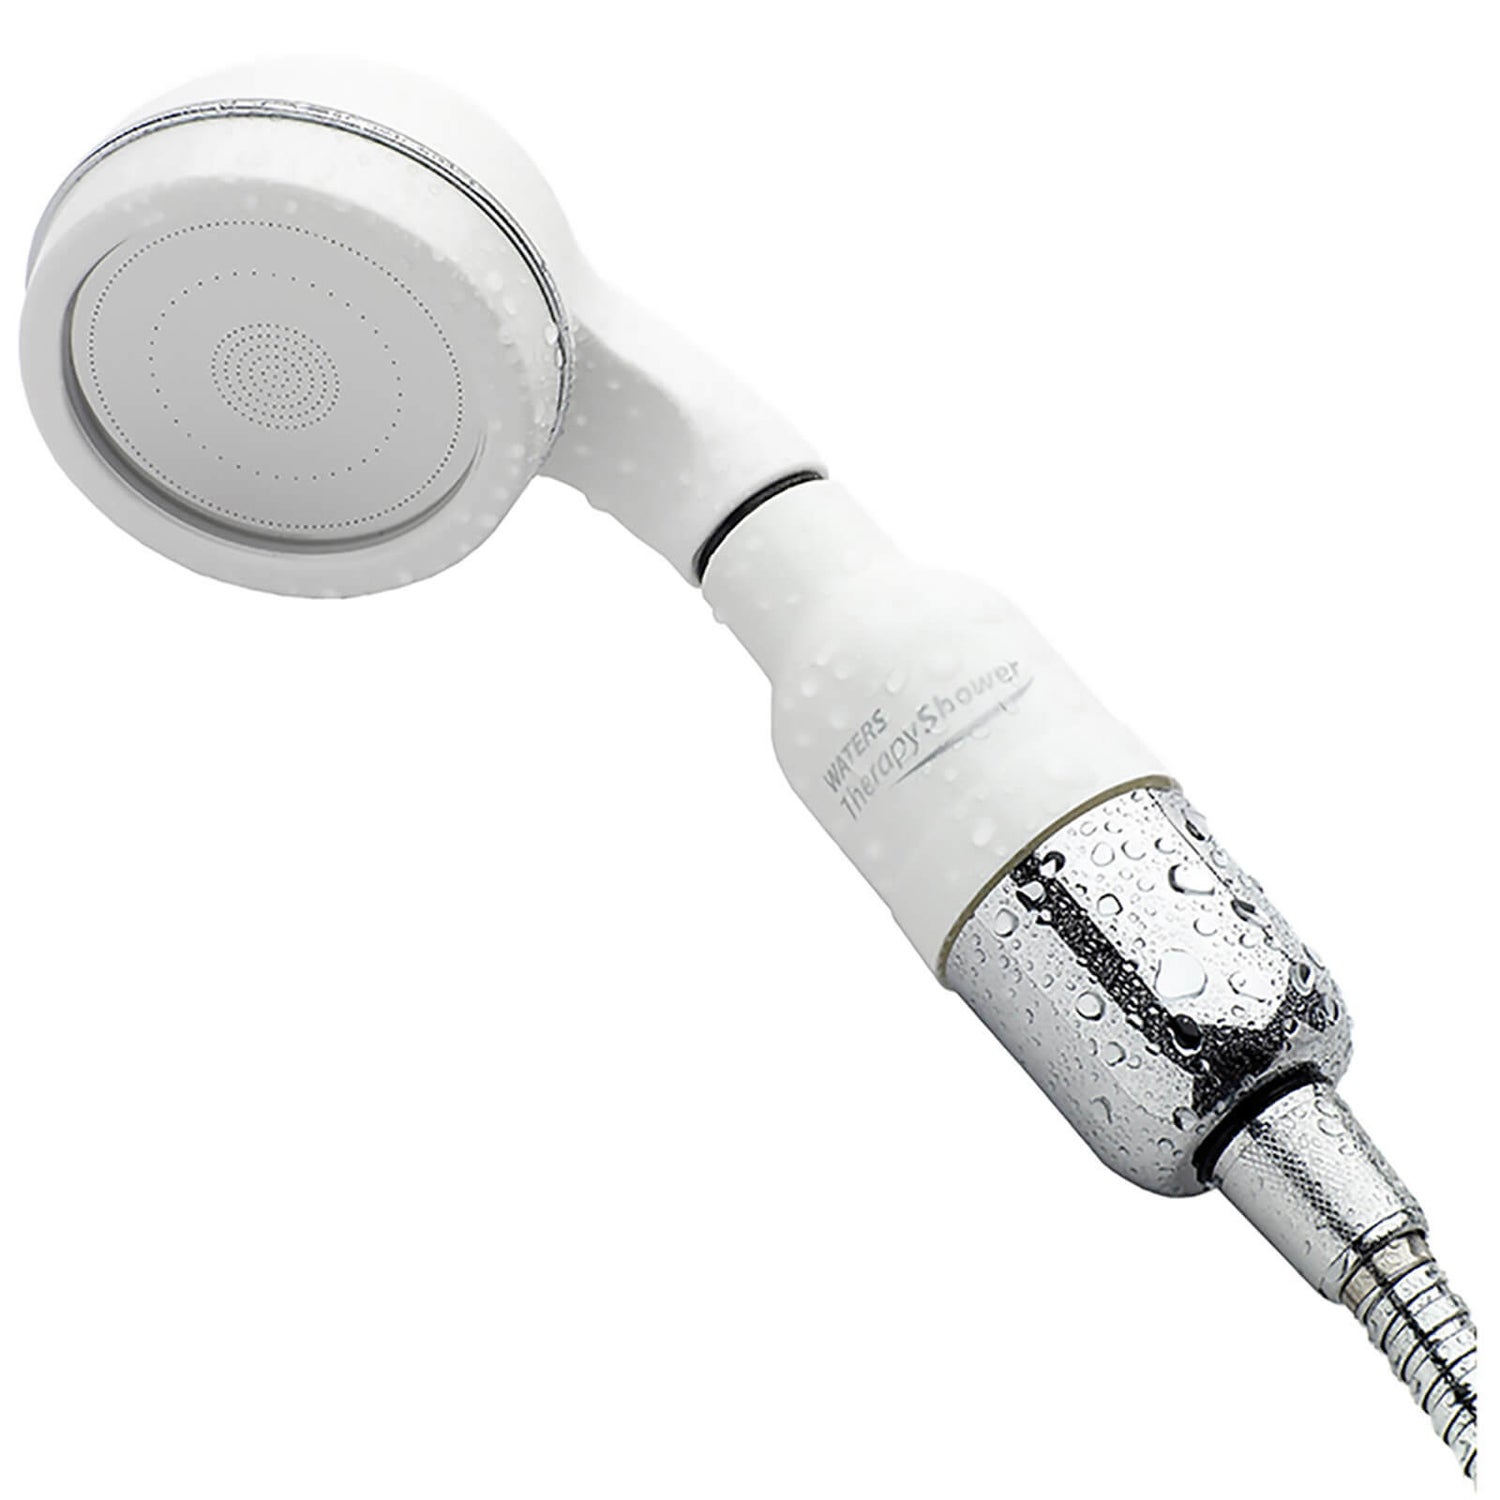 Waters Therapy Shower Shower Head (with 2 Refill Cartridges)